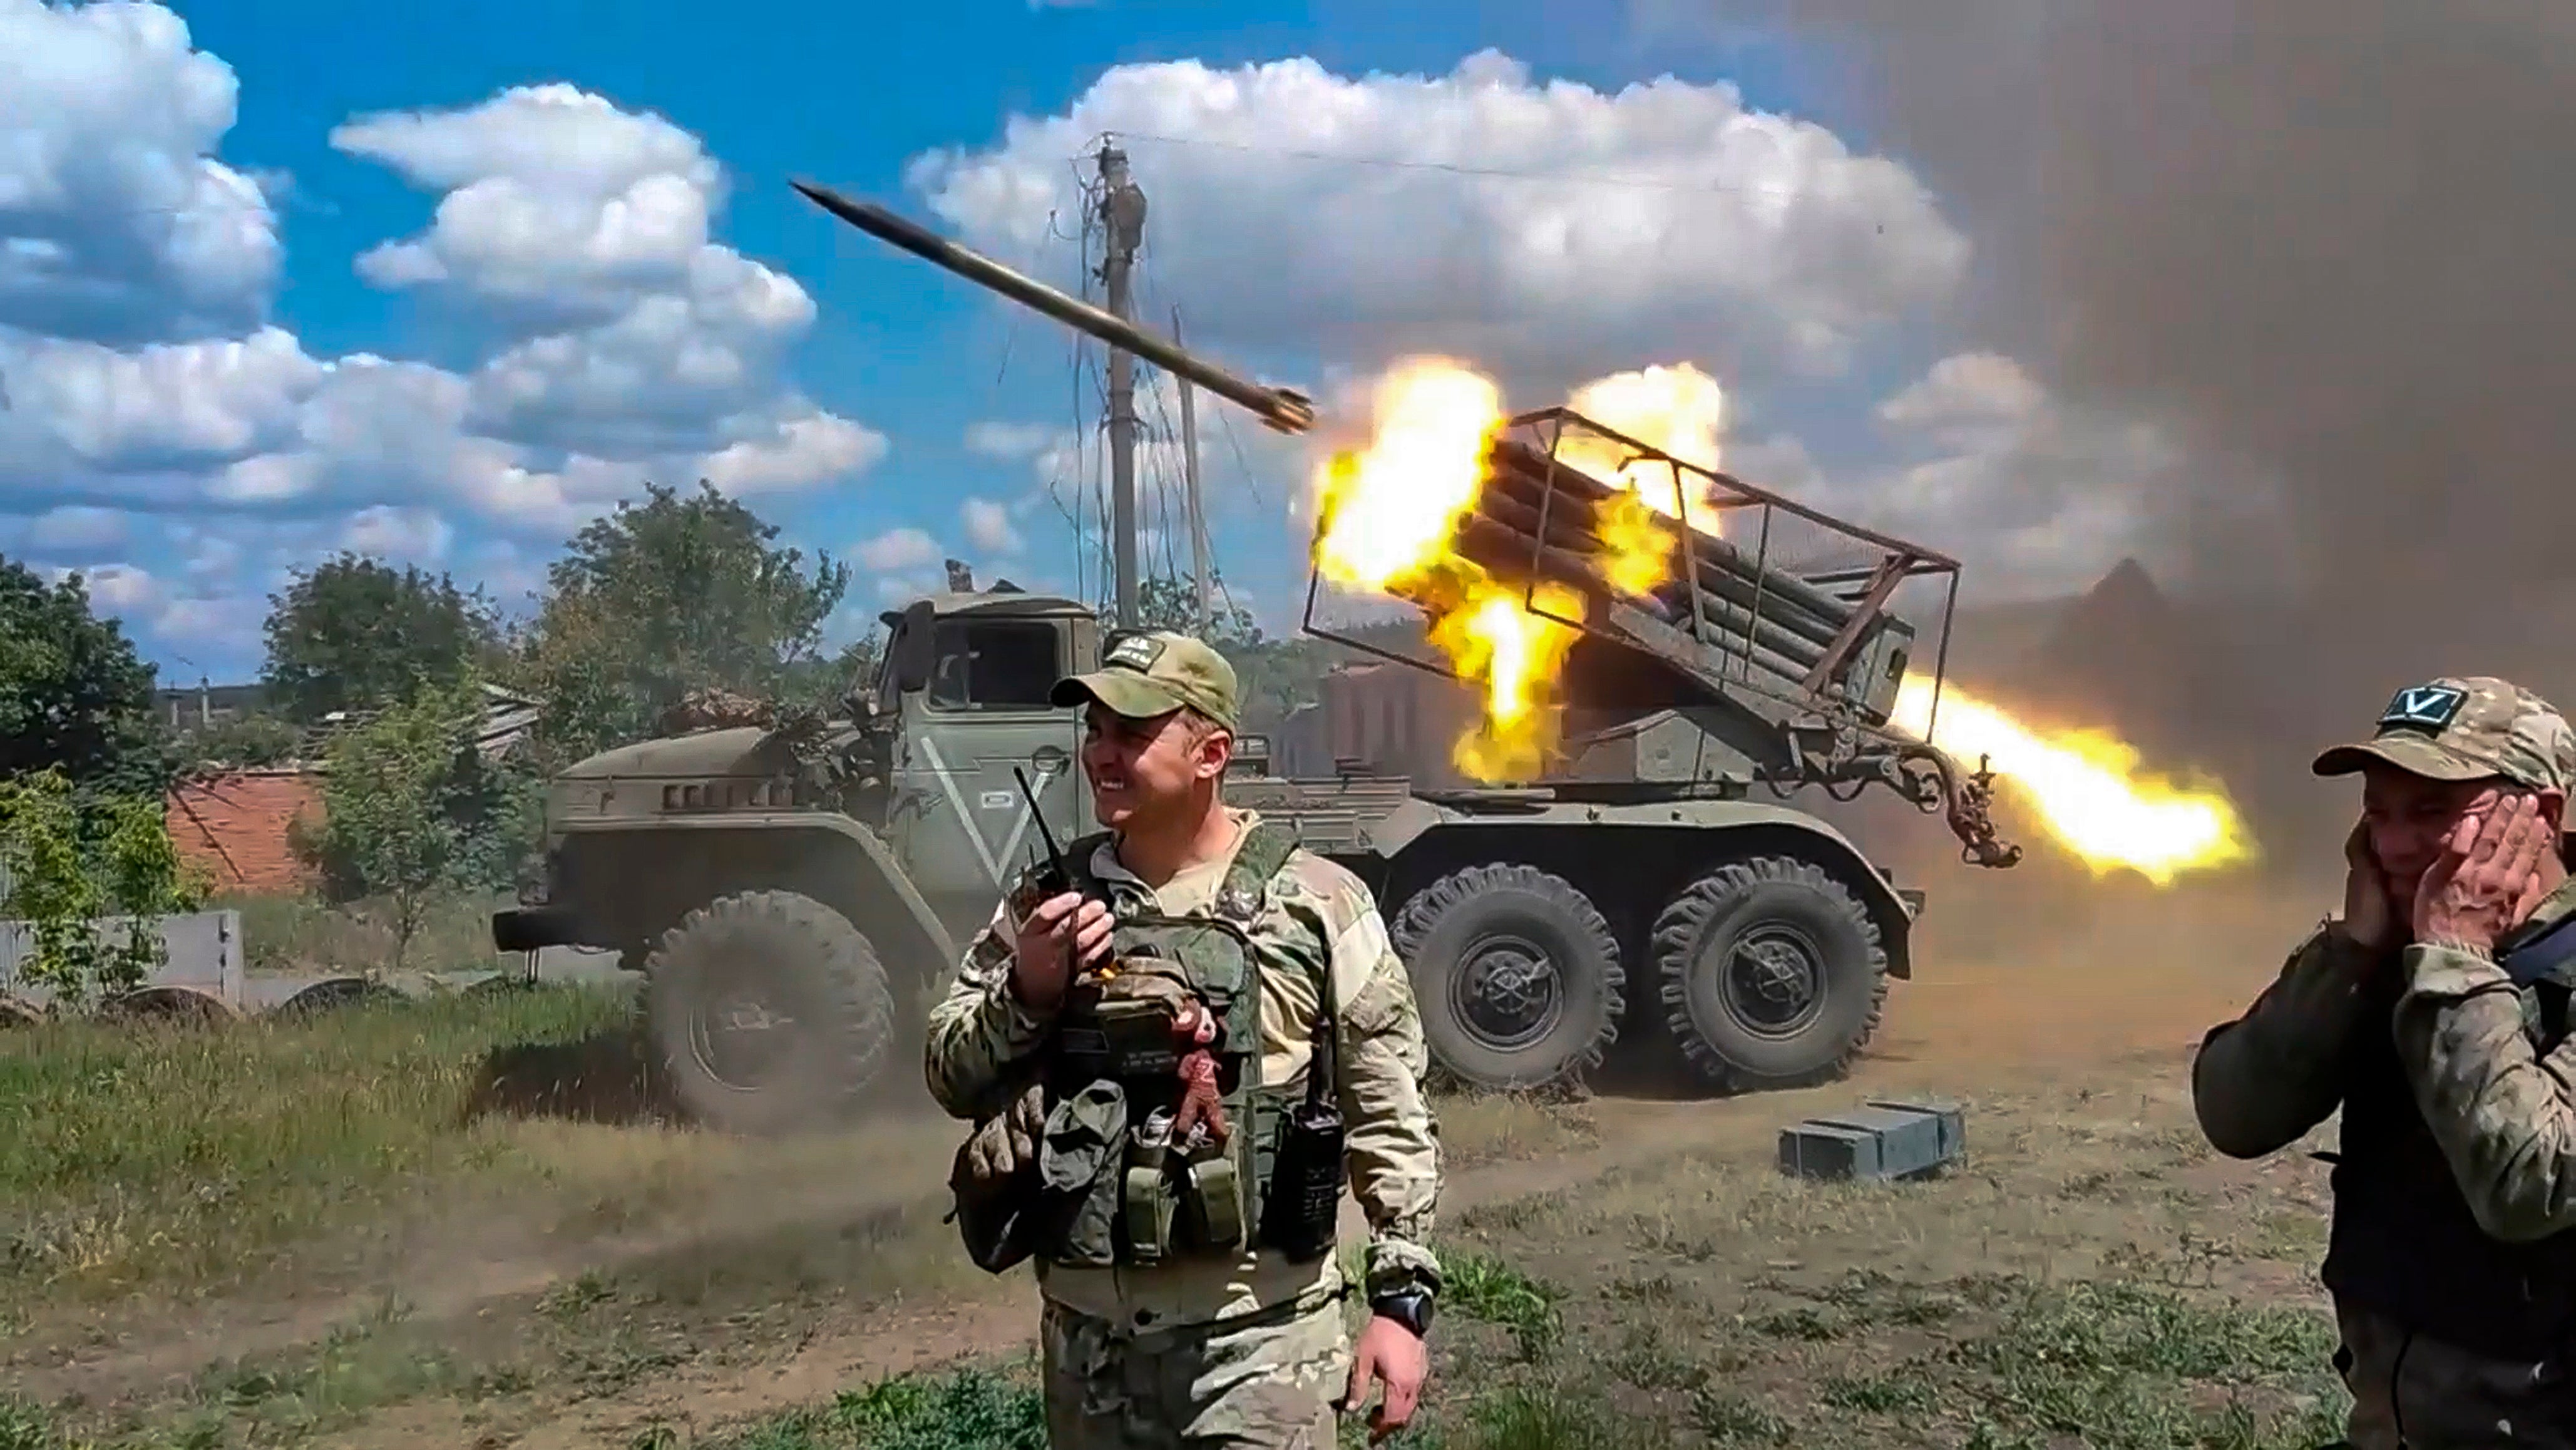 Russian soldiers fire from the BM-21 “Grad” self-propelled 122mm multiple rocket launcher in an undisclosed location in Ukraine